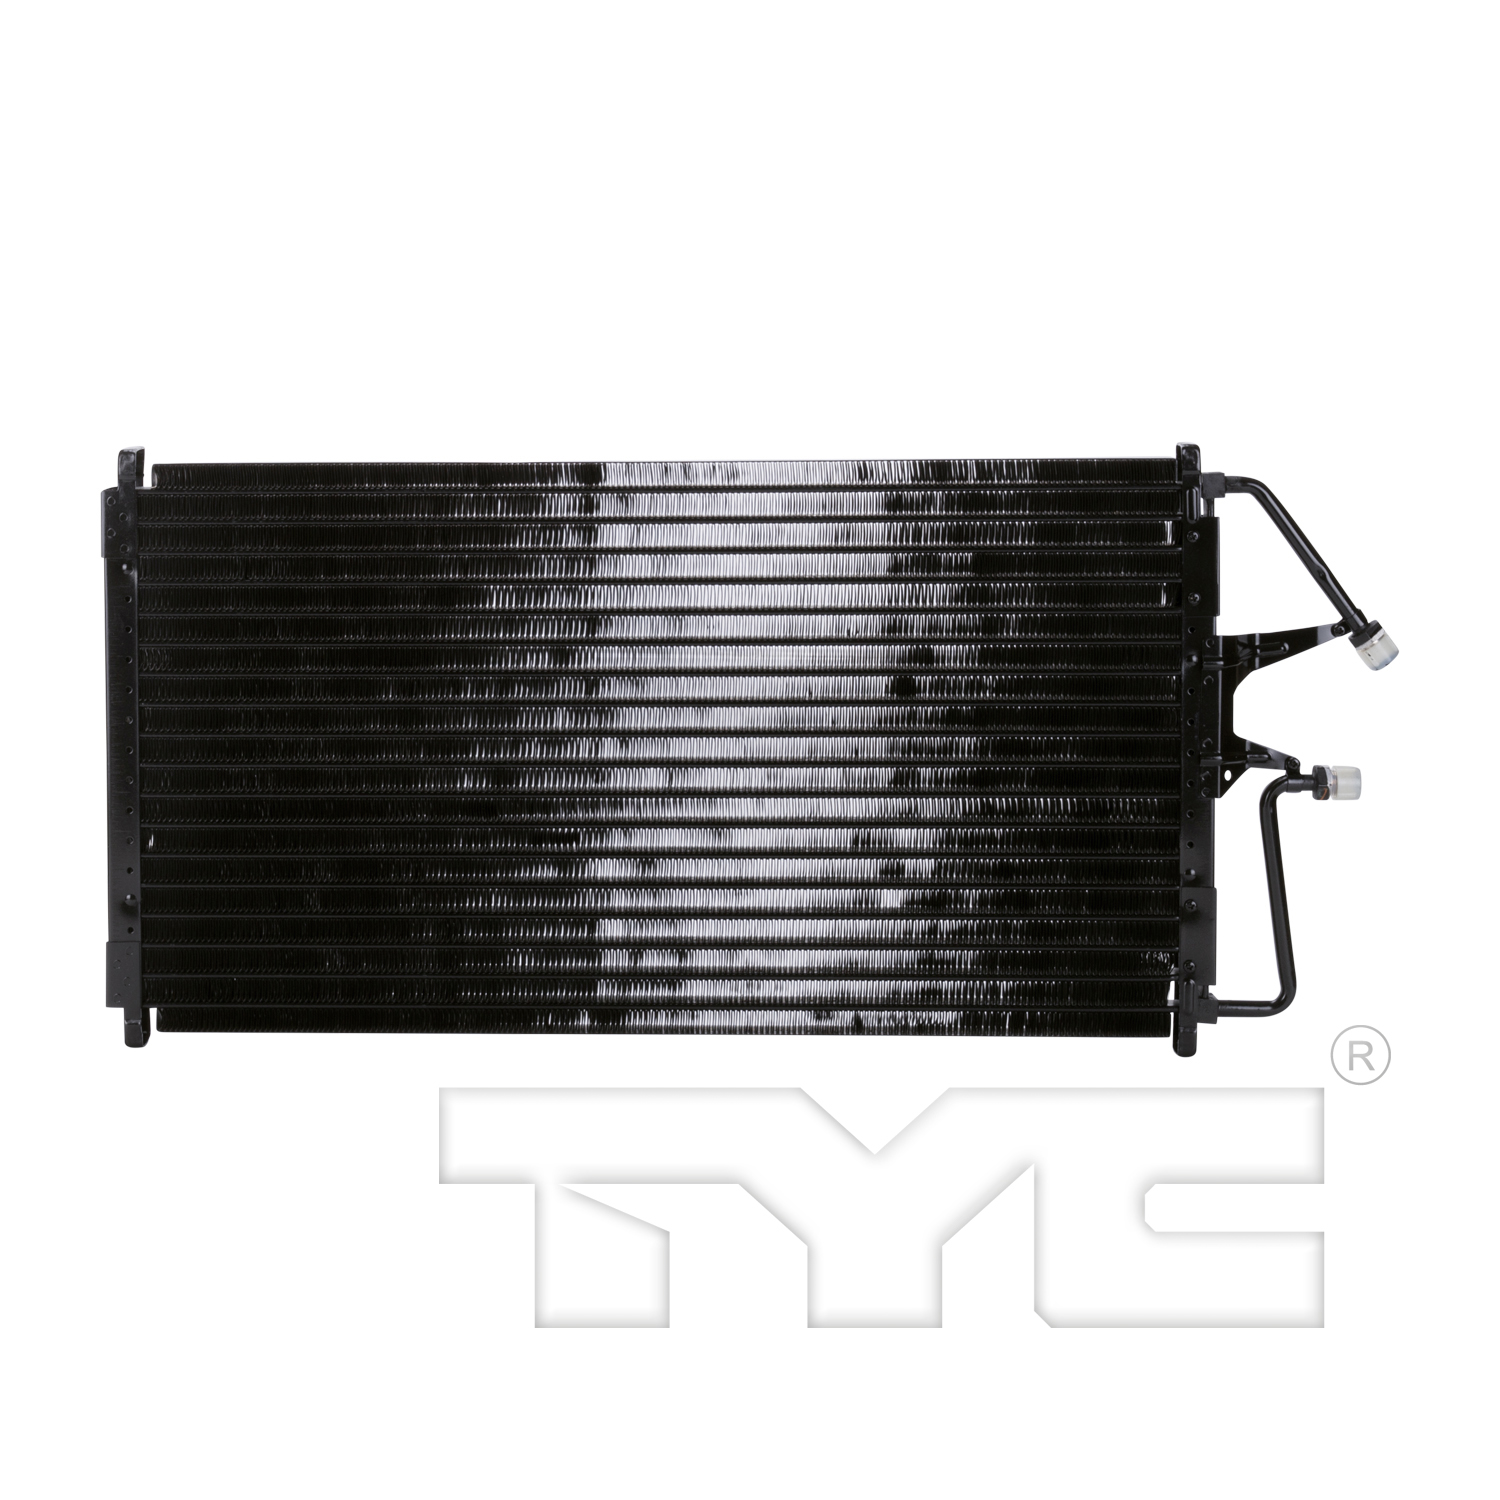 Aftermarket AC CONDENSERS for GMC - K1500 SUBURBAN, K1500 SUBURBAN,96-99,Air conditioning condenser